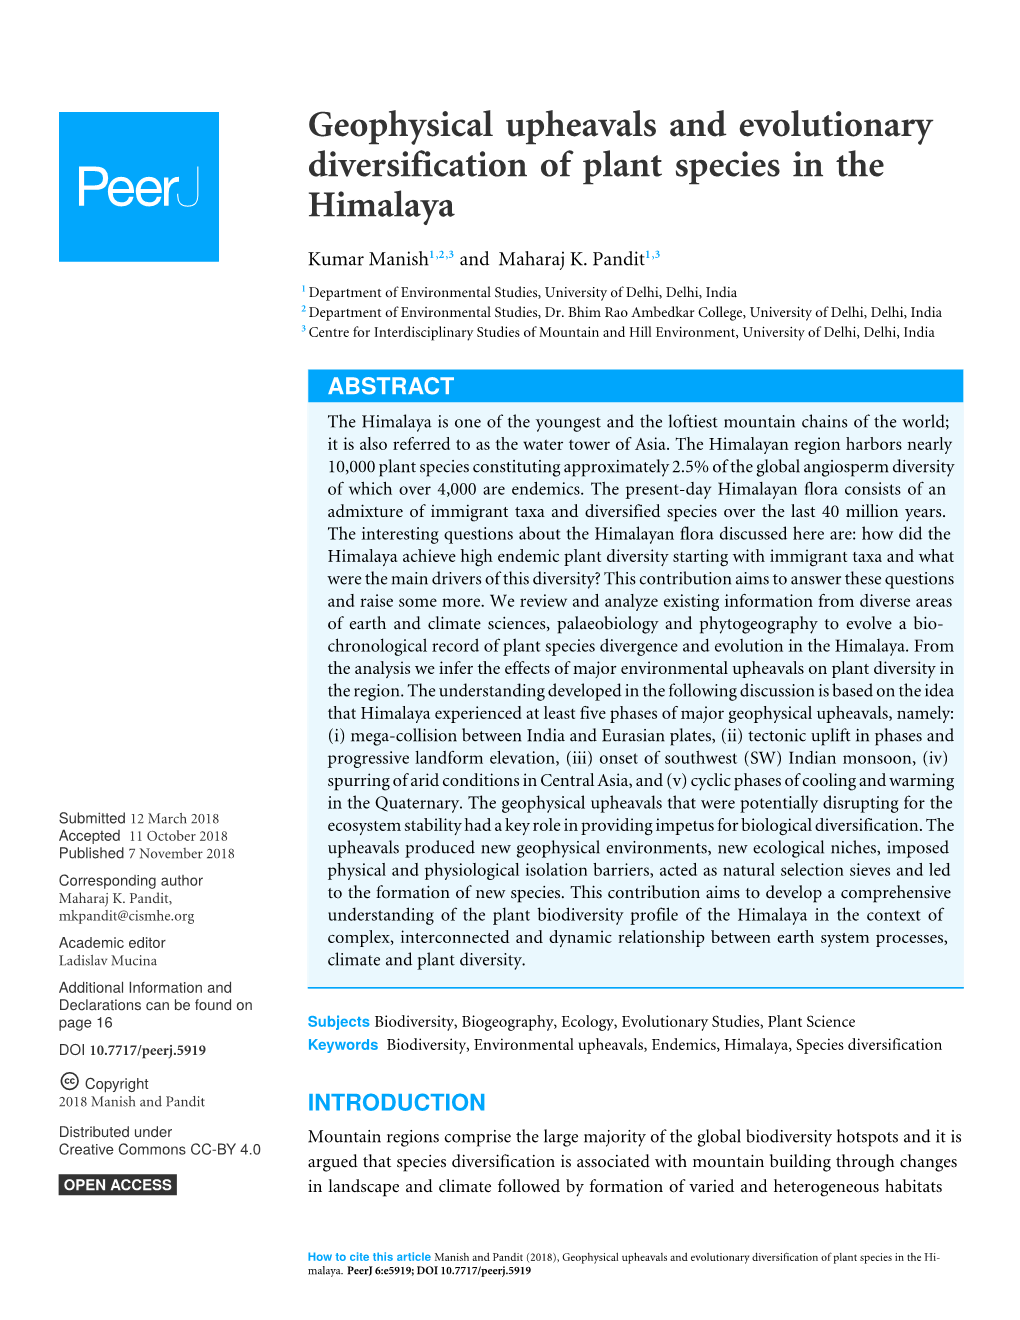 Geophysical Upheavals and Evolutionary Diversification of Plant Species in the Himalaya